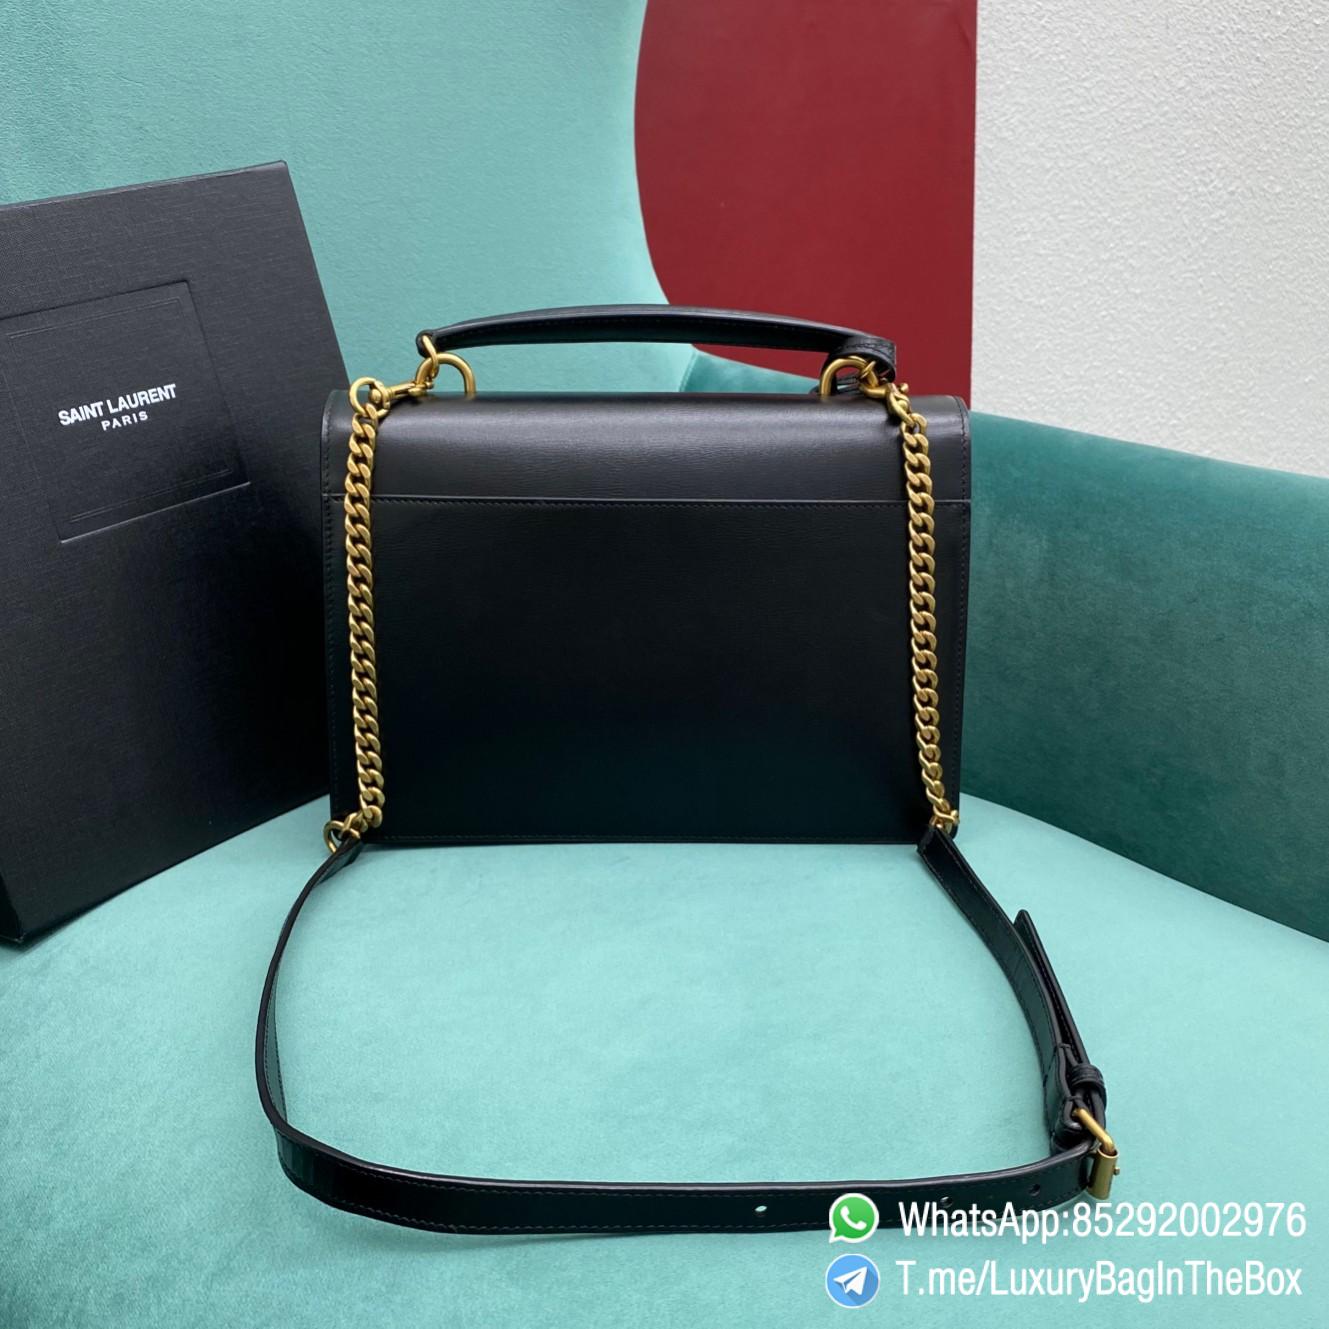 YSL MEDIUM SUNSET SATCHEL IN BLACK SMOOTH LEATHER SATCHEL FRONT FLAP TOP HANDLE ADJUSTABLE AND DETACHABLE LEATHER AND CHAIN STRAP BRONZE METAL YSL INITIALS SKU 634723D420W1000 03